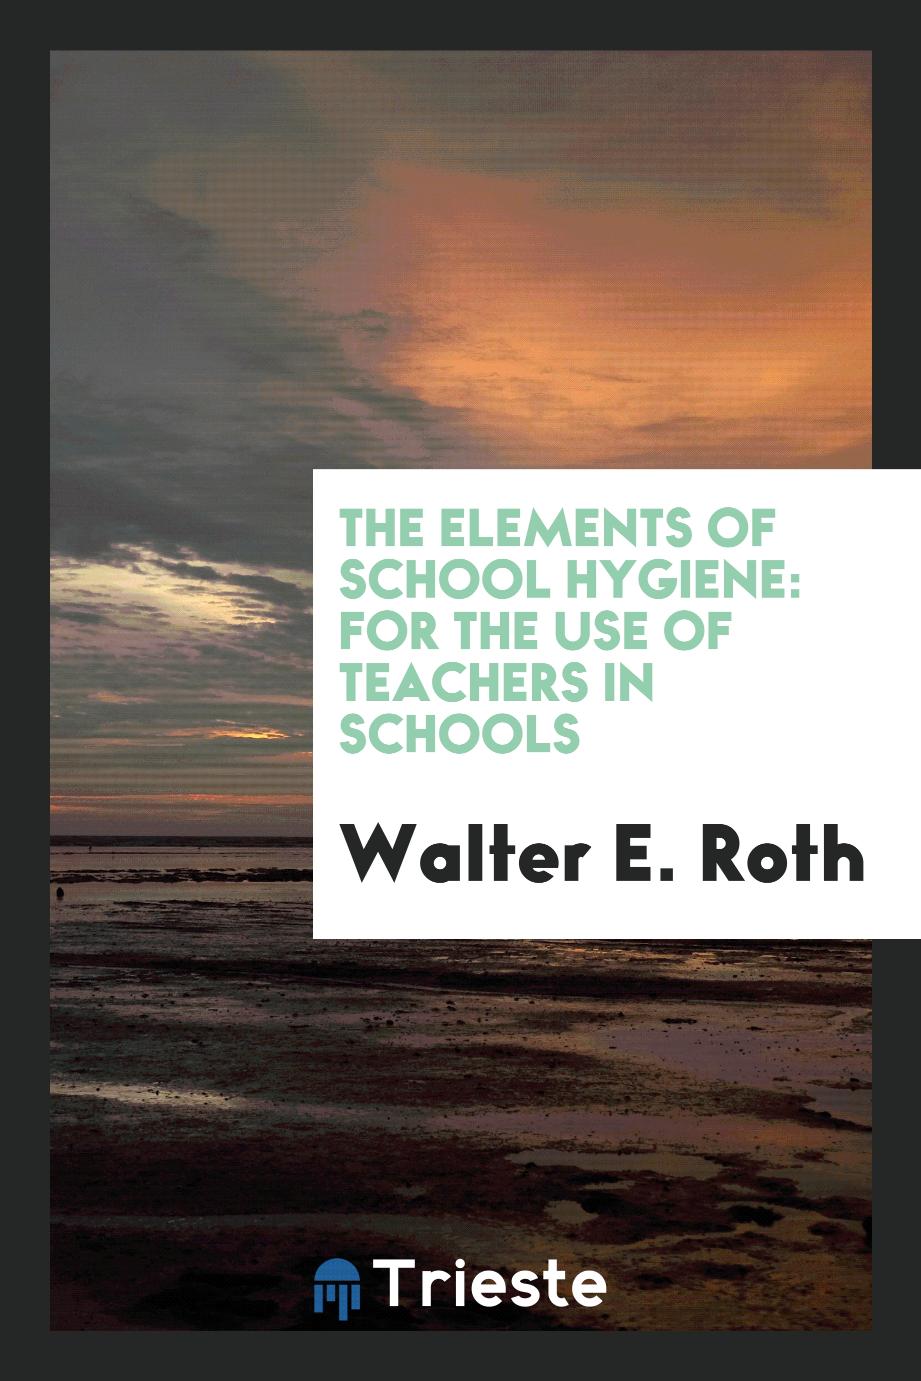 The Elements of School Hygiene: For the Use of Teachers in Schools